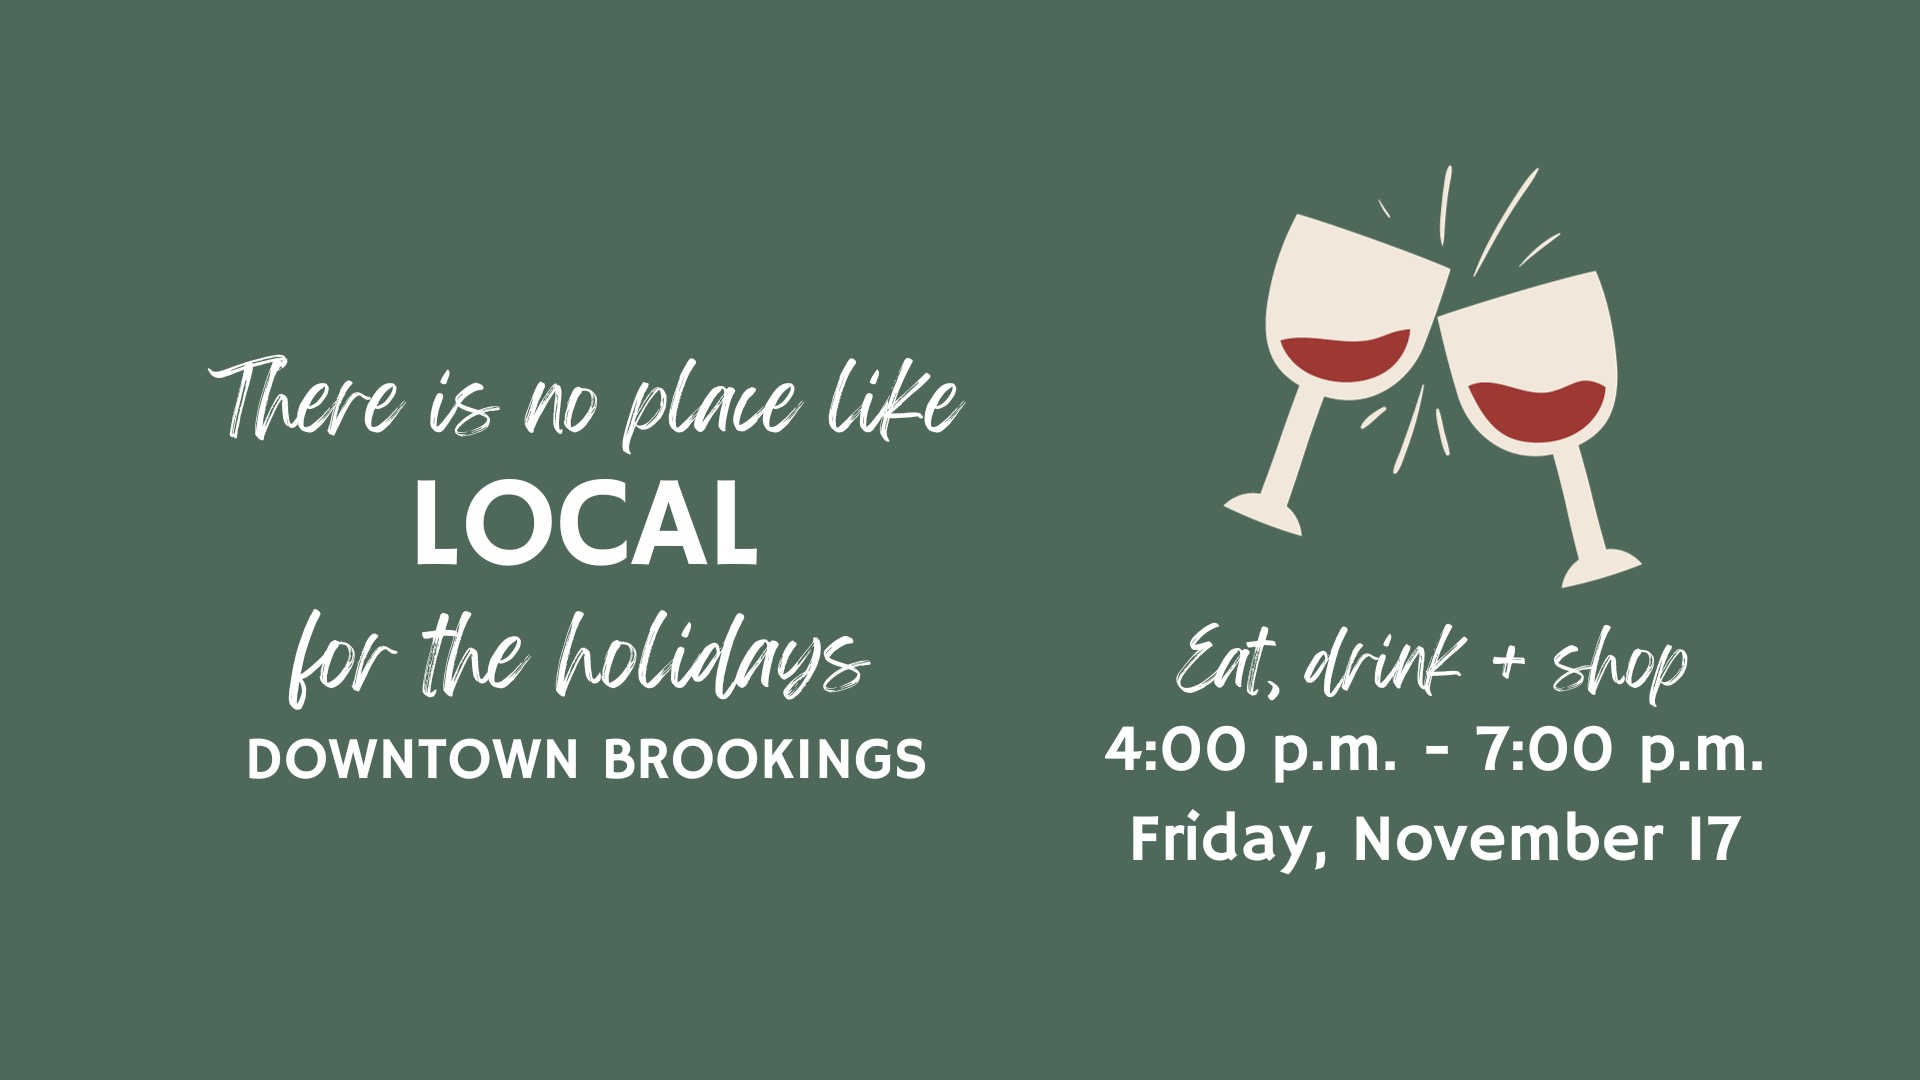 There is no place like LOCAL for the Holidays